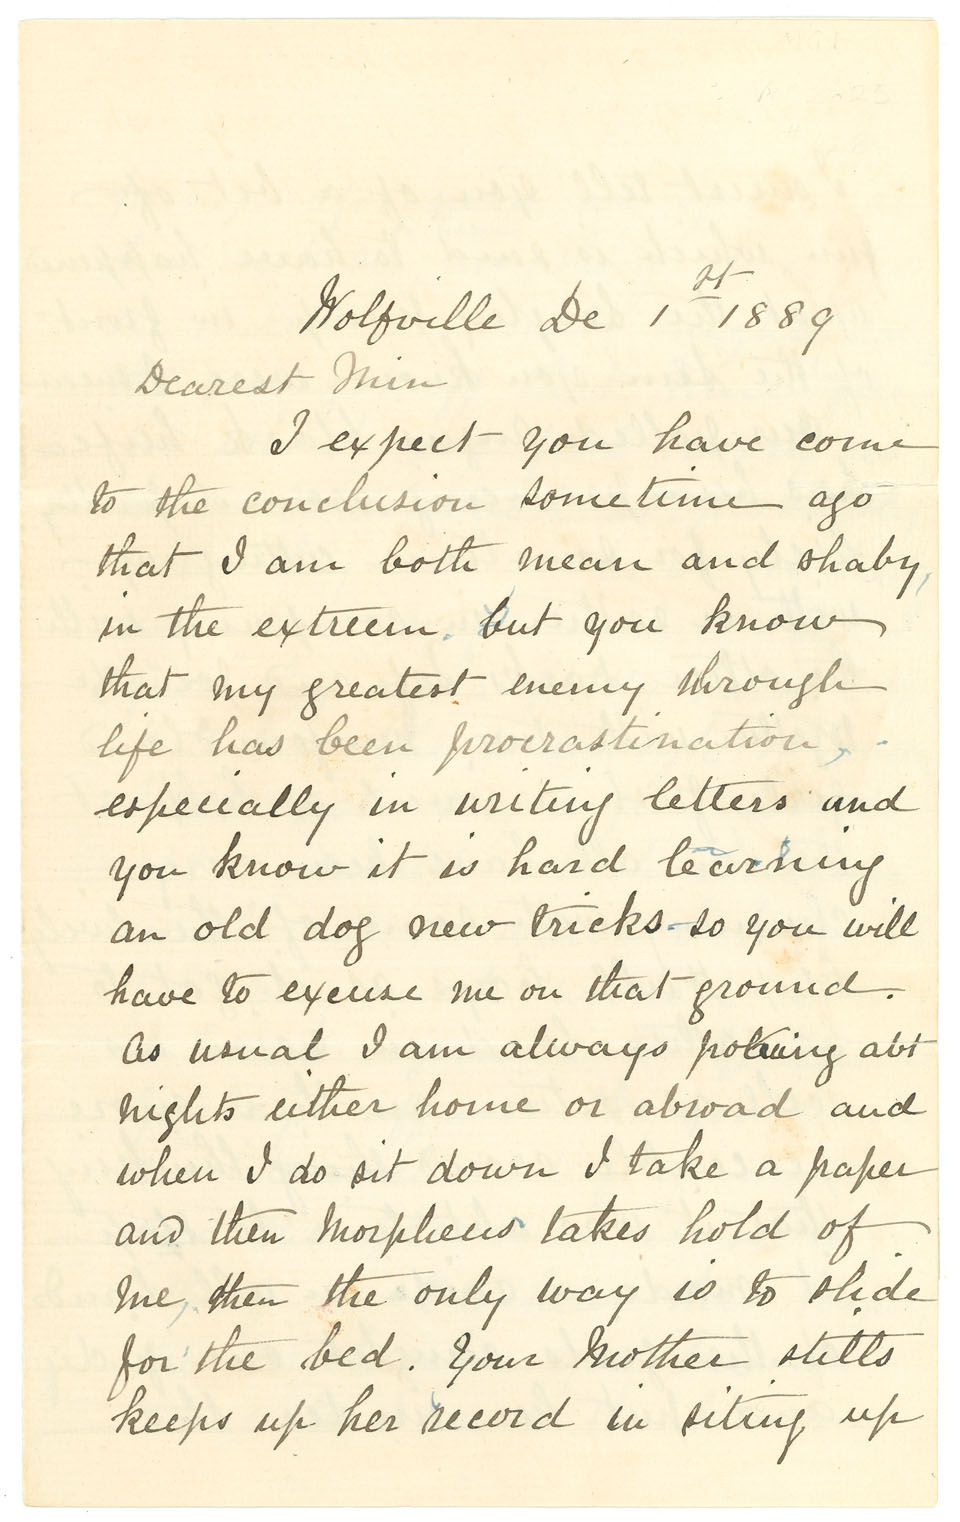 Letter from Samuel Prat to his daughter Minnie concerning her relationship with Goodridge Roberts, her fiancé